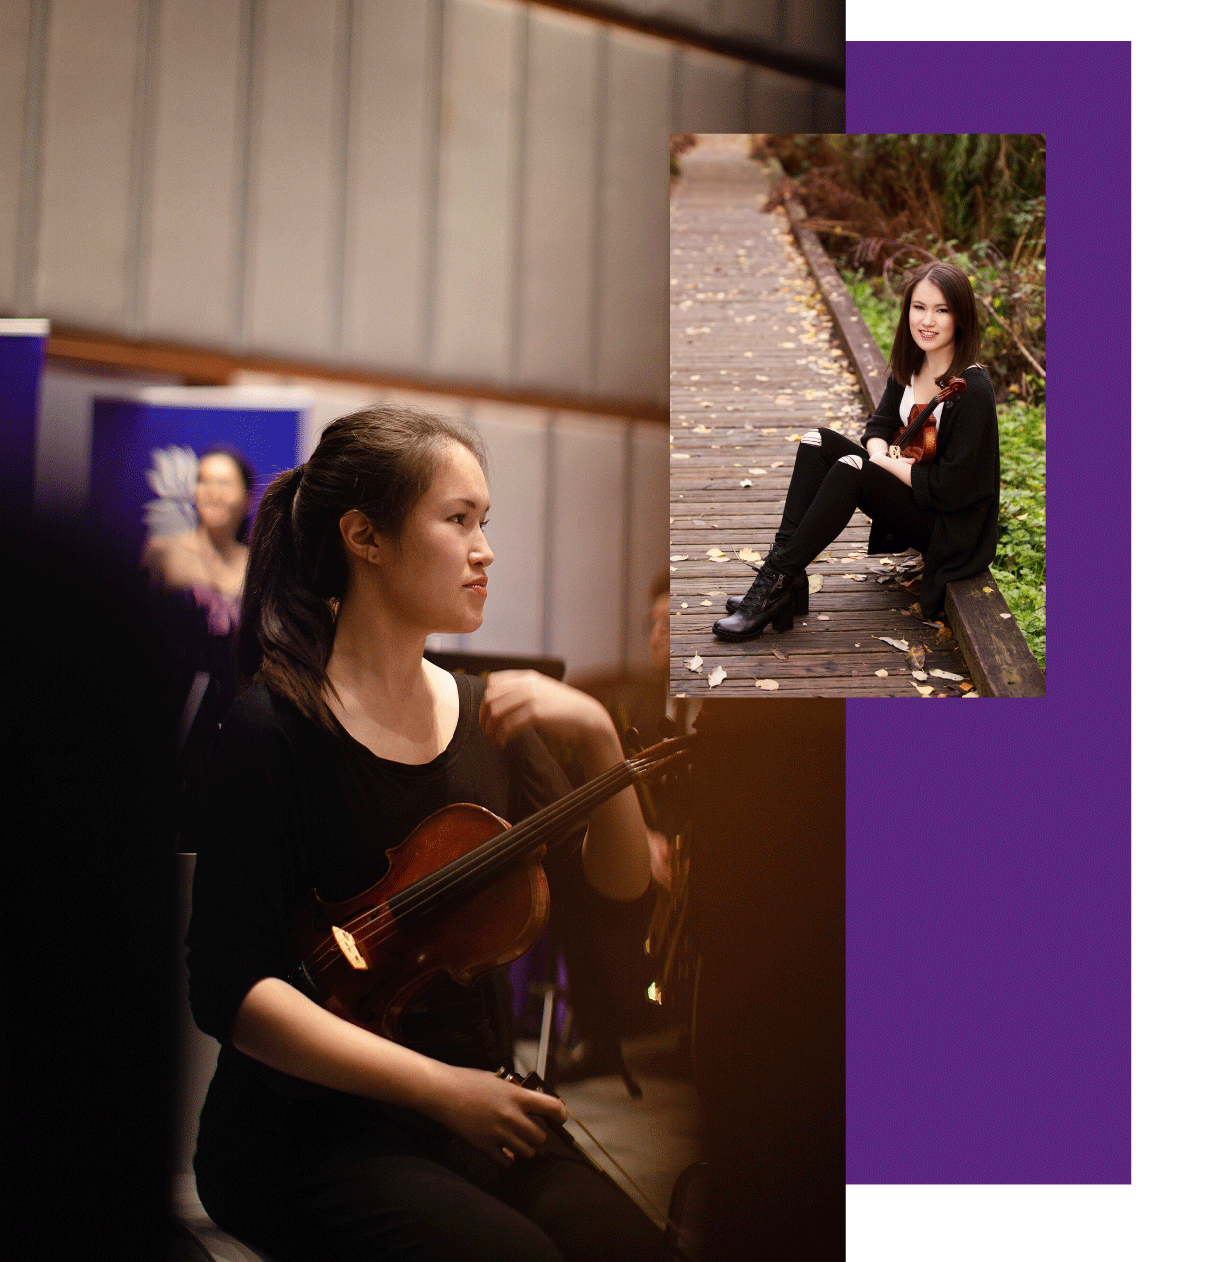 A collage of two images: 1) Jaime Cantwell holding her violin in the resting position. 2) Jaime sitting outside on a wooden walkway holding her violin